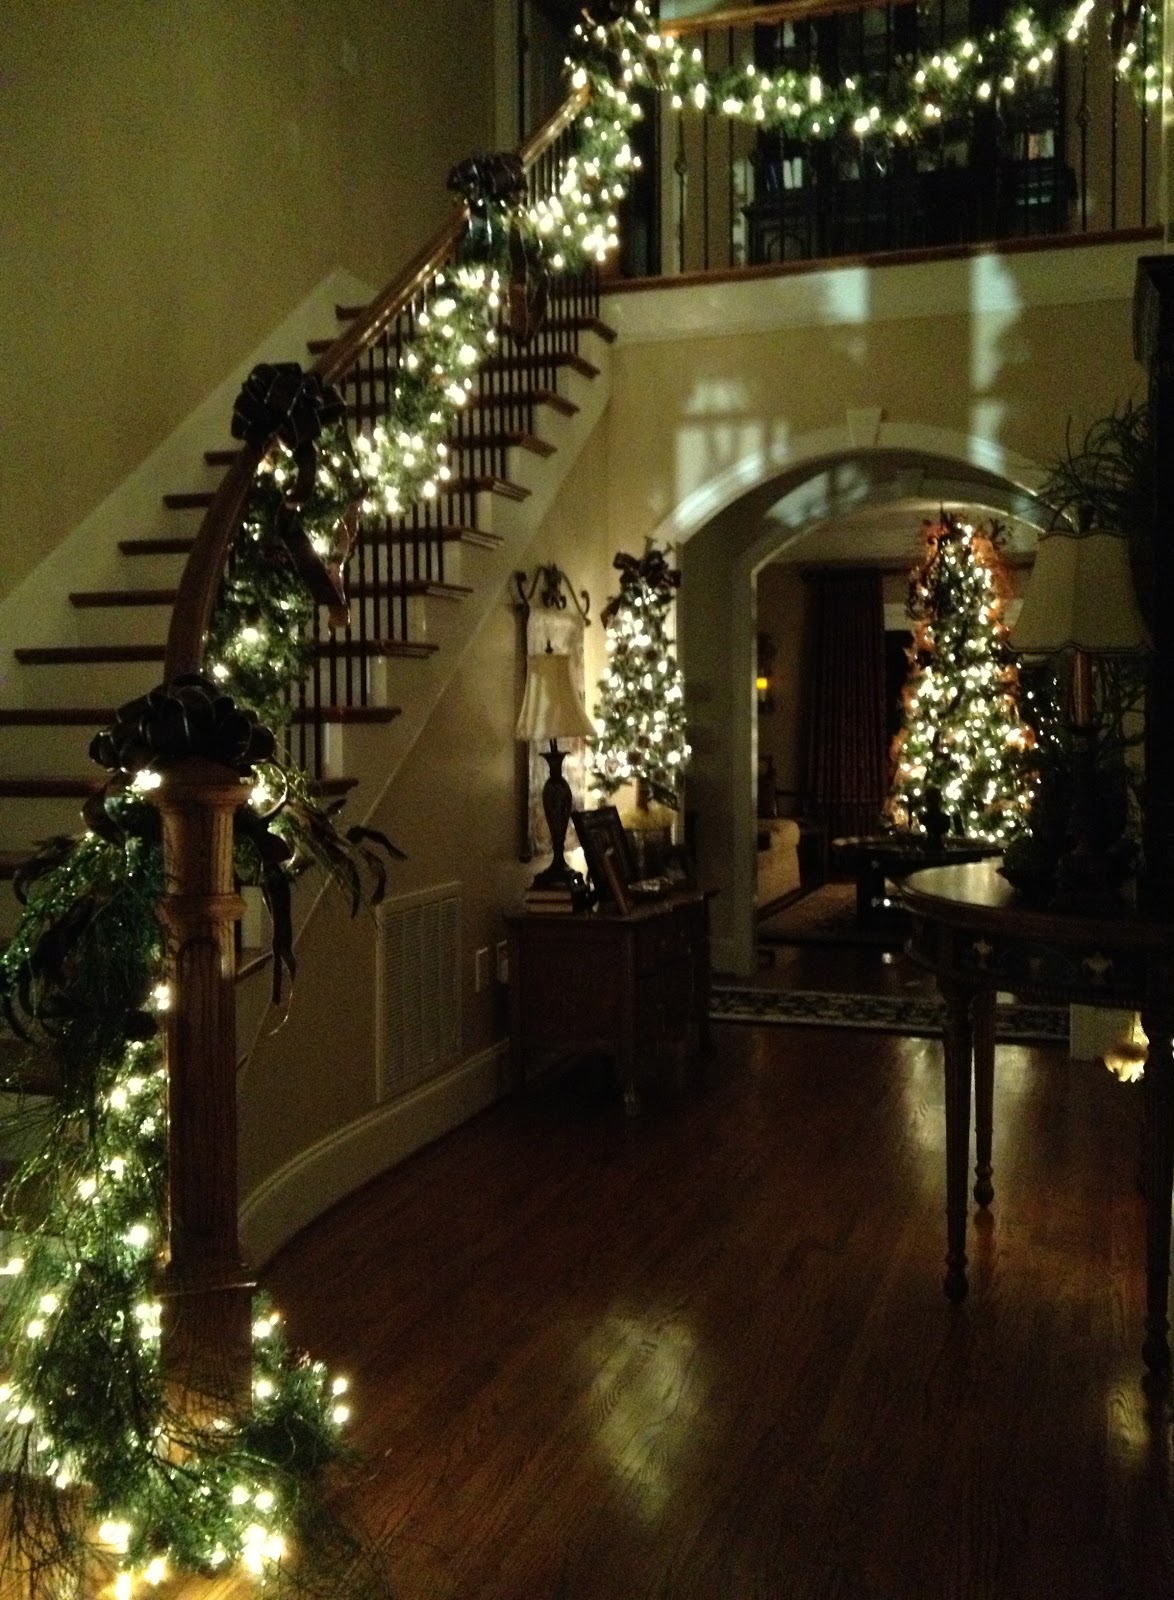 Southern 'n Sassy: Christmas Garland On the Stairs